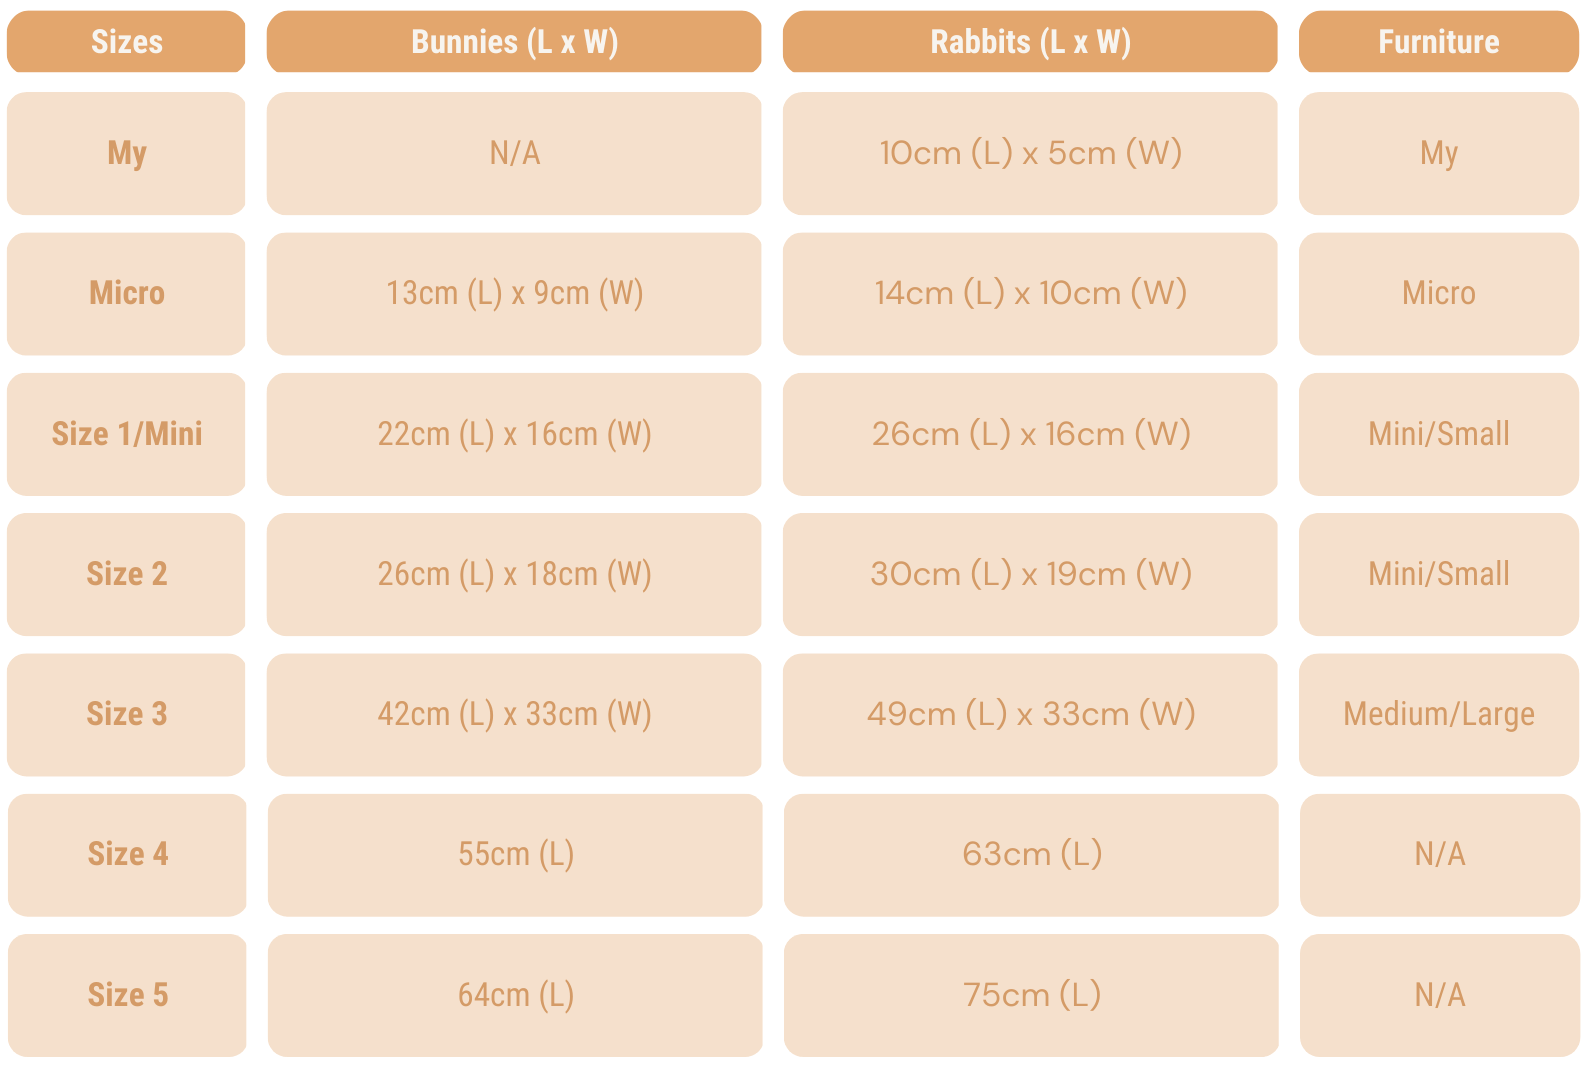 Maileg Bunnies and Rabbits Sizing Guide